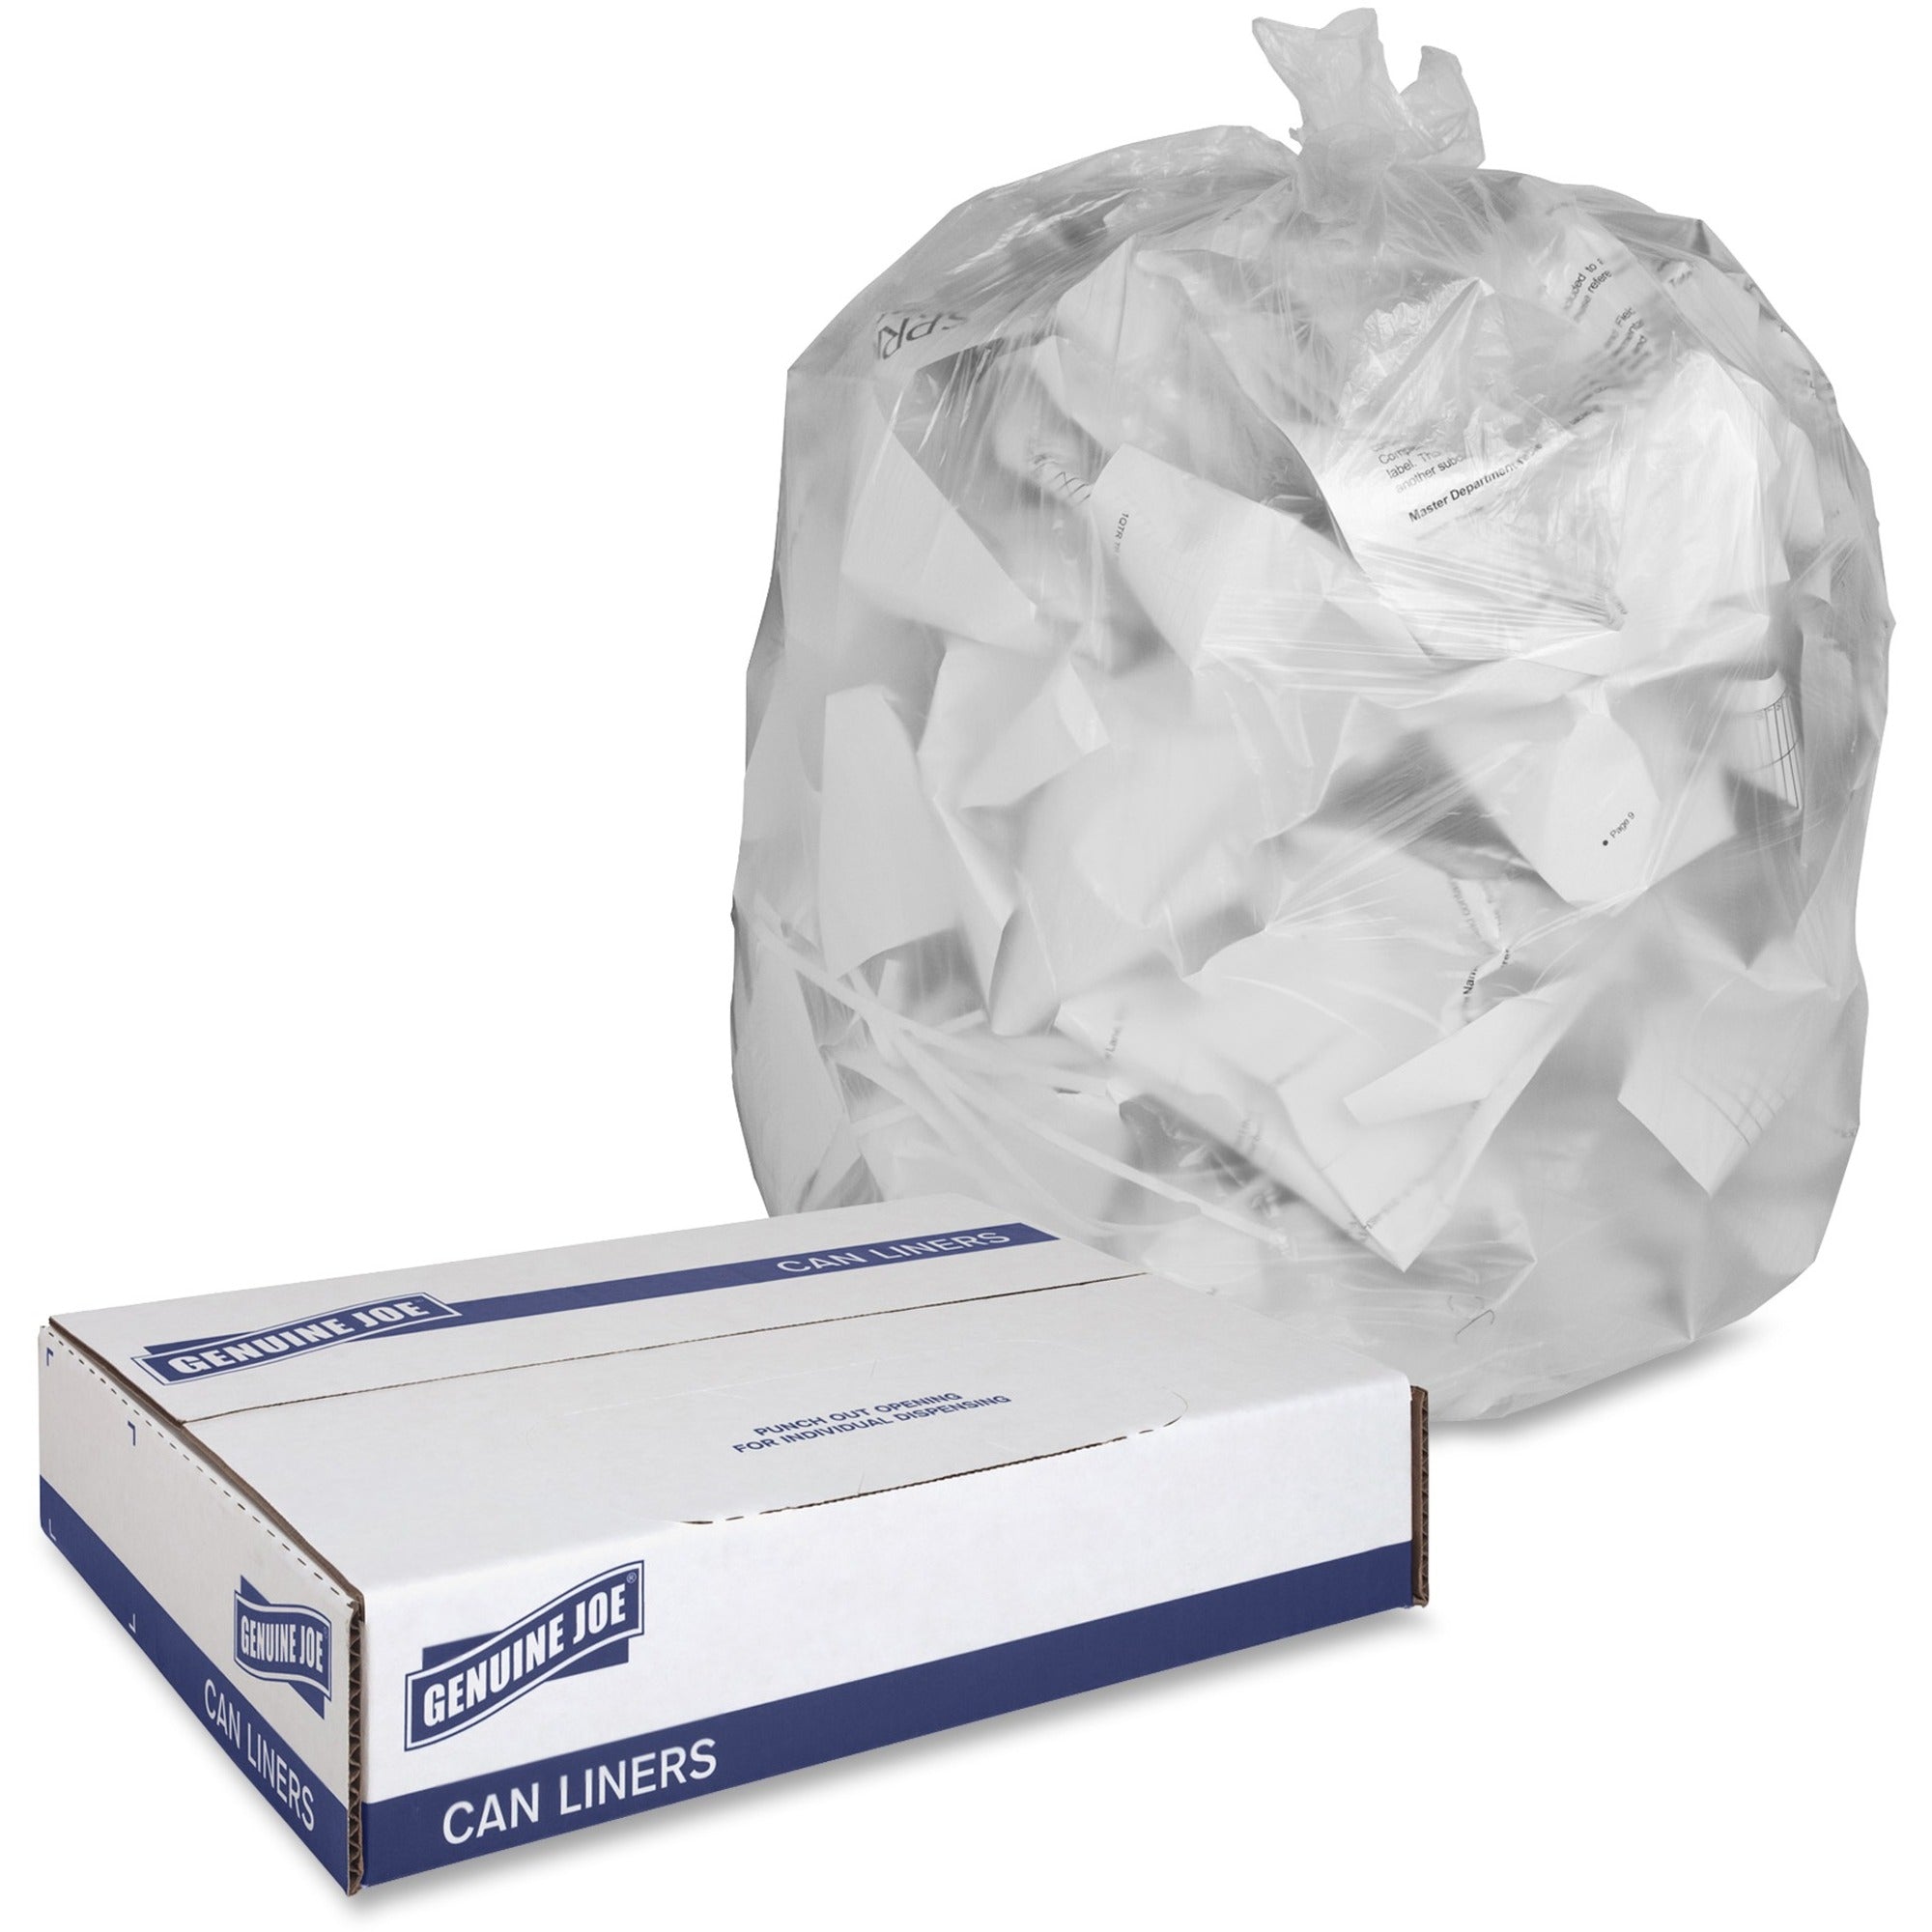 Genuine Joe Economy High-Density Can Liners - Small Size - 16 gal Capacity - 24" Width x 32" Length - 0.24 mil (6 Micron) Thickness - High Density - Translucent - Resin - 1000/Carton - 